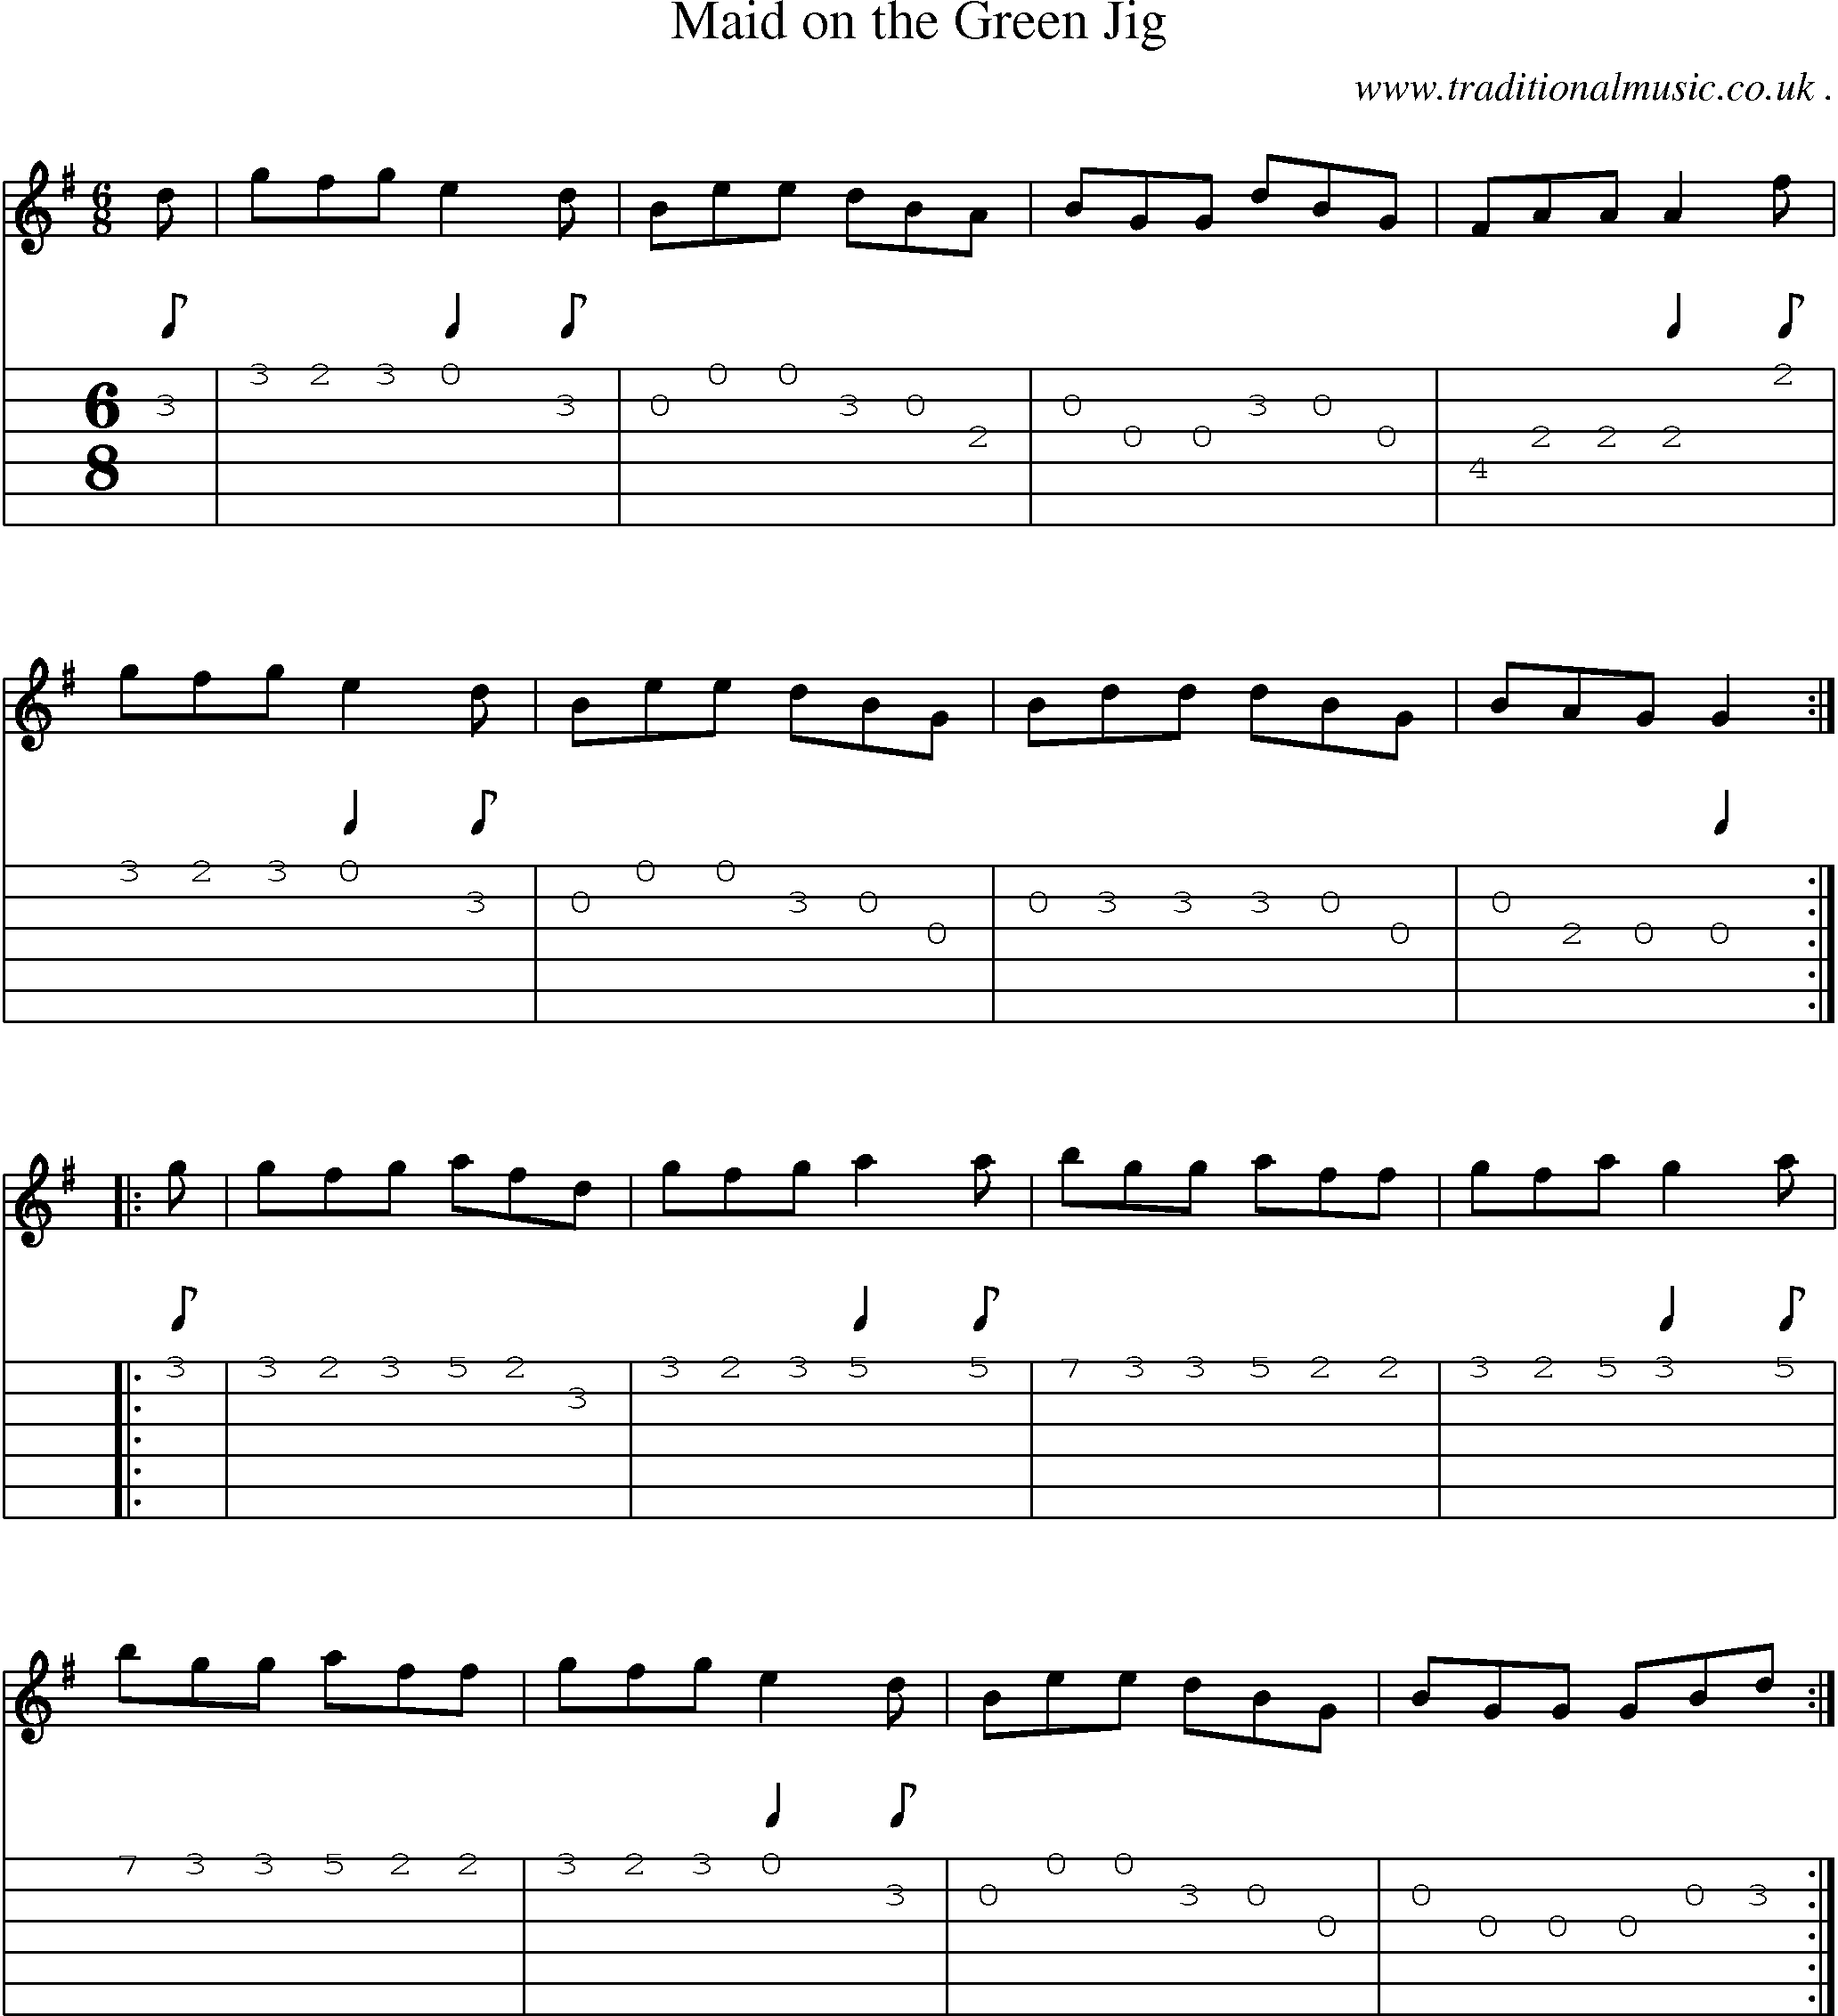 Sheet-Music and Guitar Tabs for Maid On The Green Jig